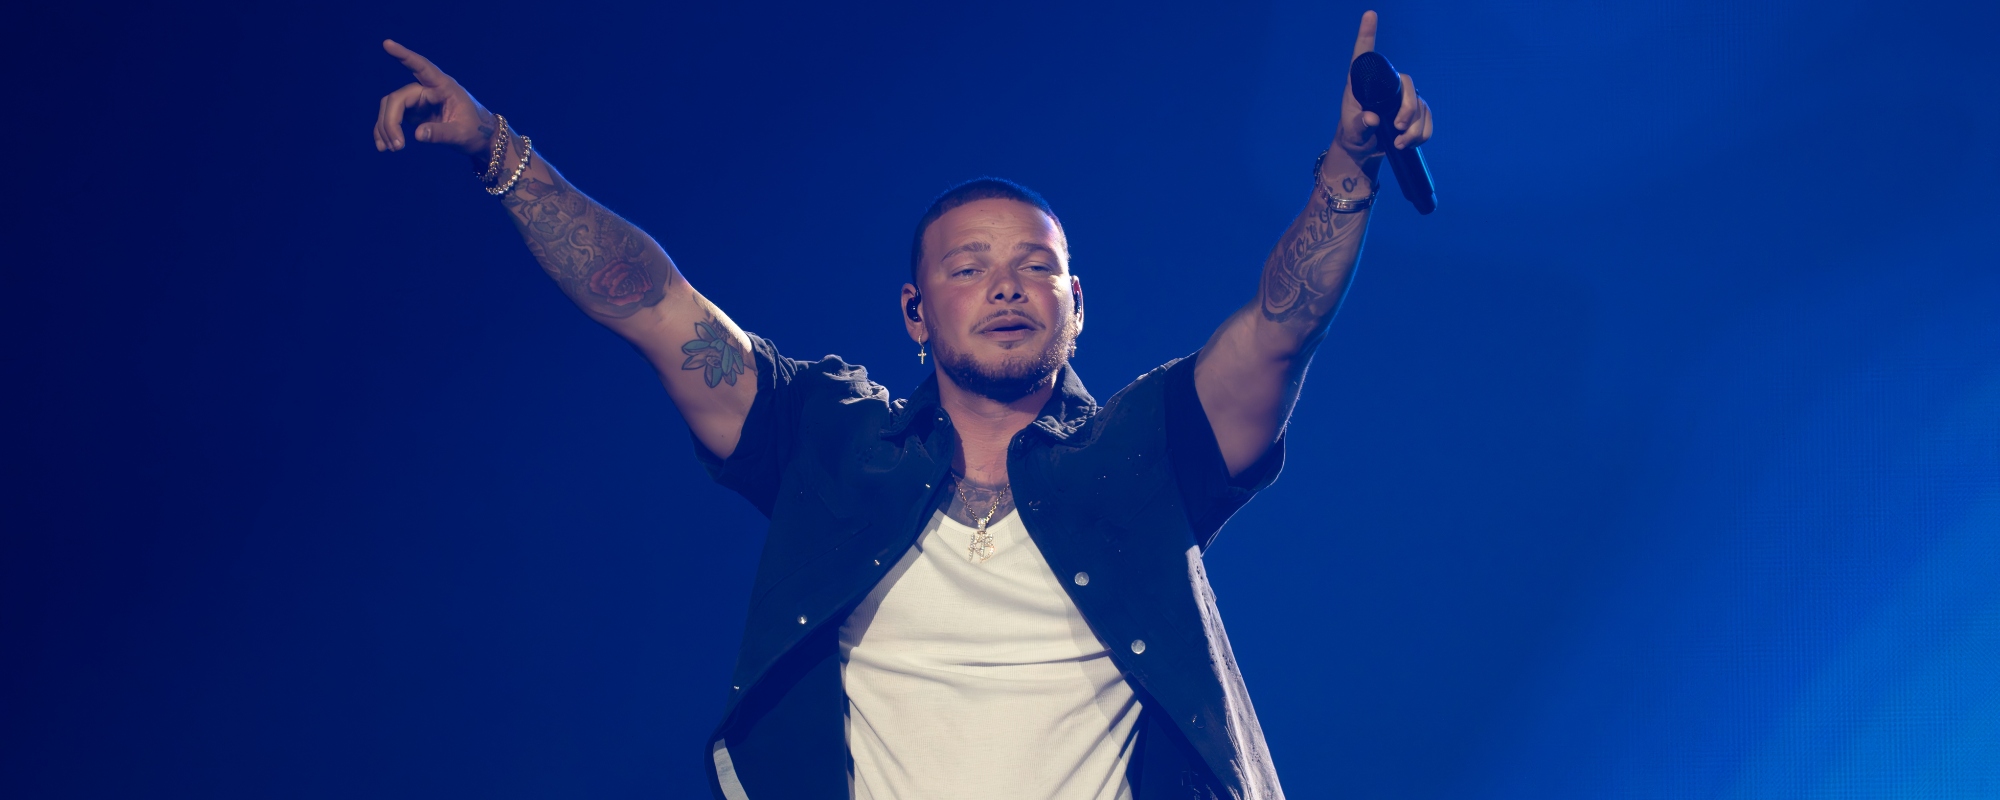 Kane Brown Sends Country Back to the Pop Charts with “Miles On It” Featuring Marshmello